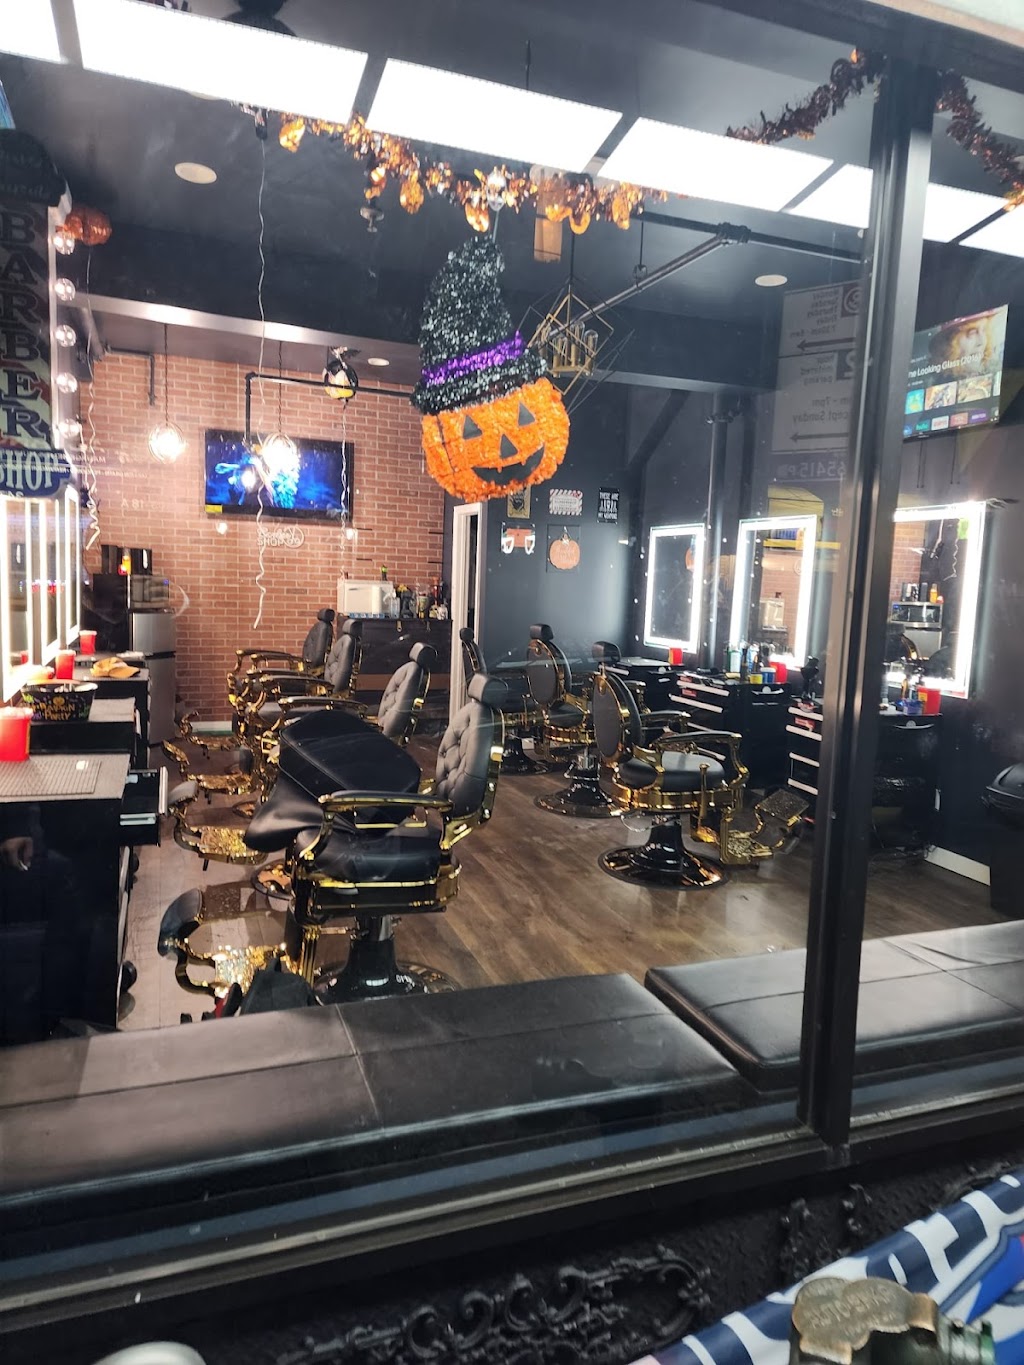 King Style Barbershop | 103-15 39th Ave, Queens, NY 11367 | Phone: (929) 402-8649